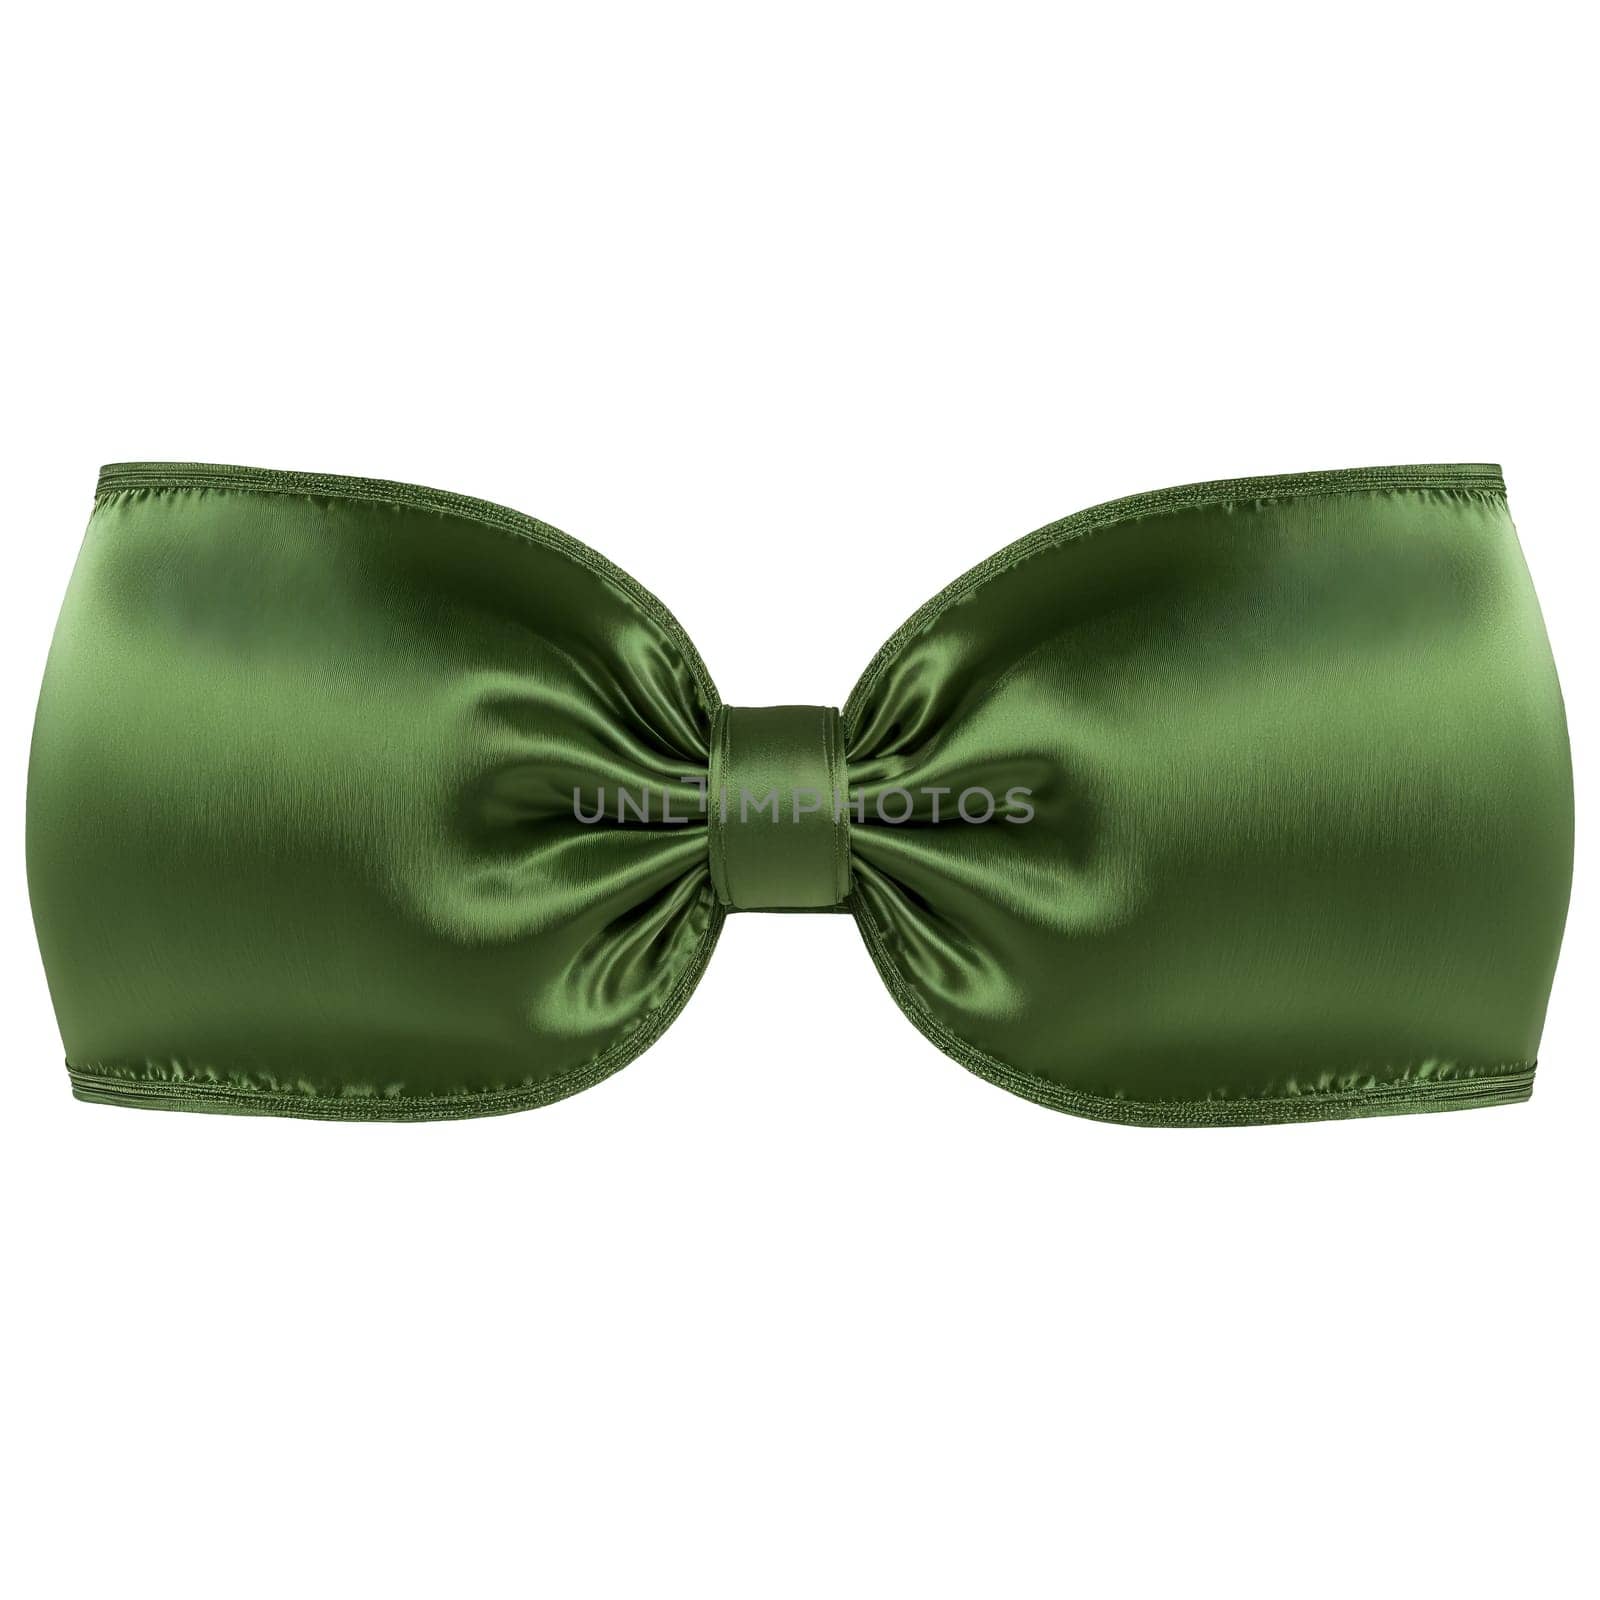 Chic Olive Green Satin Bra A chic olive green satin bra with a sophisticated earthy by panophotograph